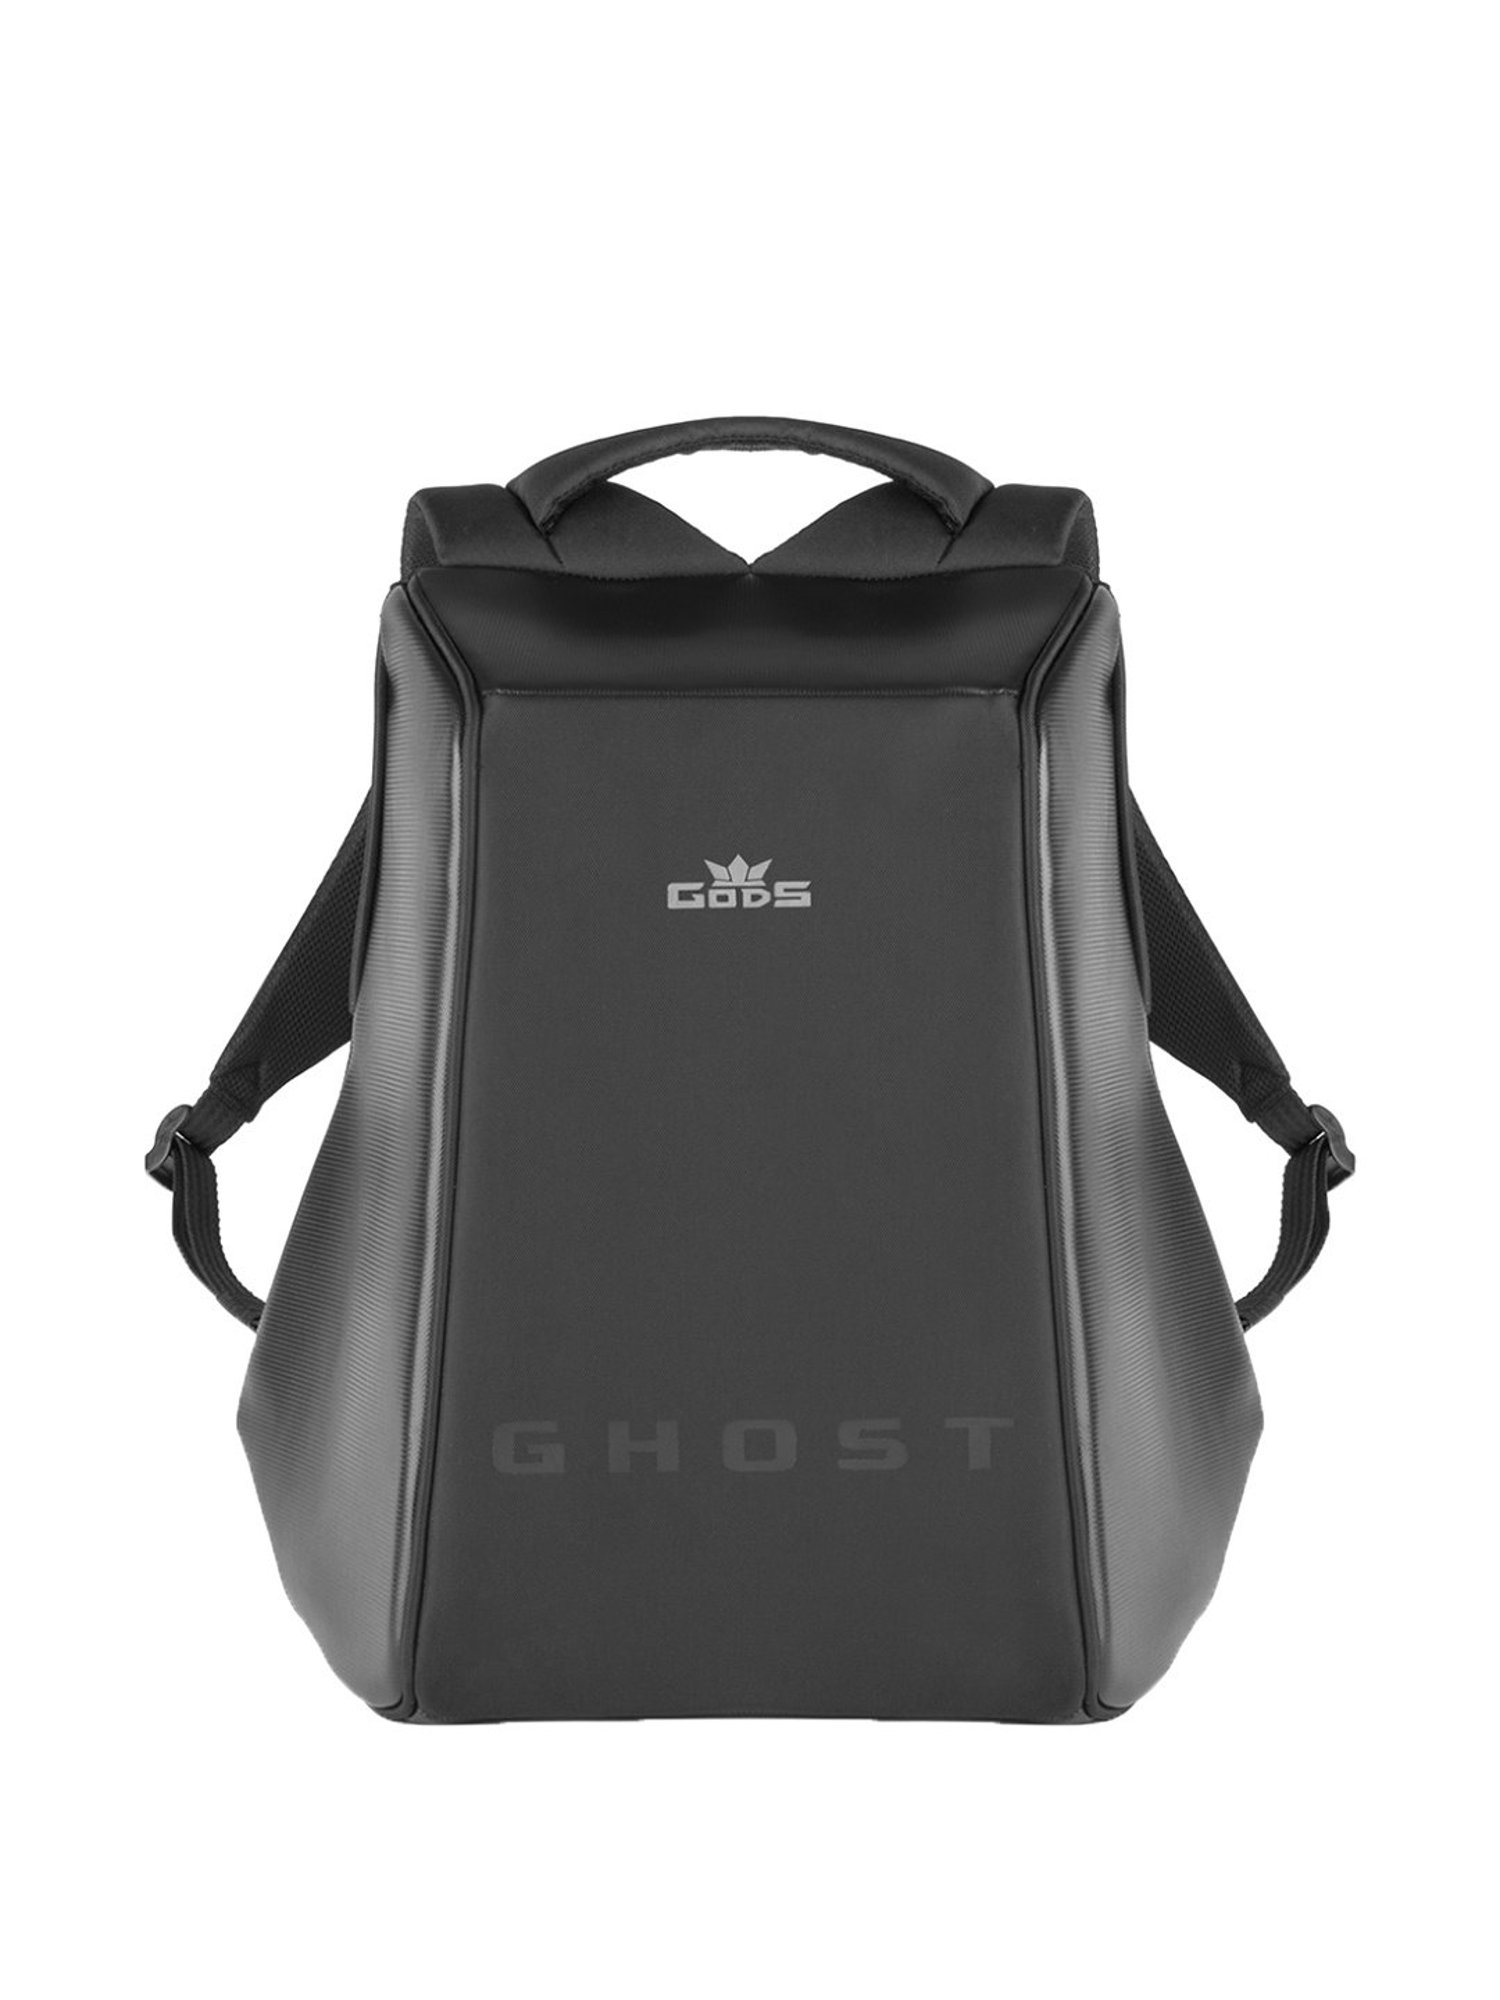 Road Gods The Ghost Premium Smooth Minimalist Anti Theft Laptop Backpack-Sunrise  Trading Co.